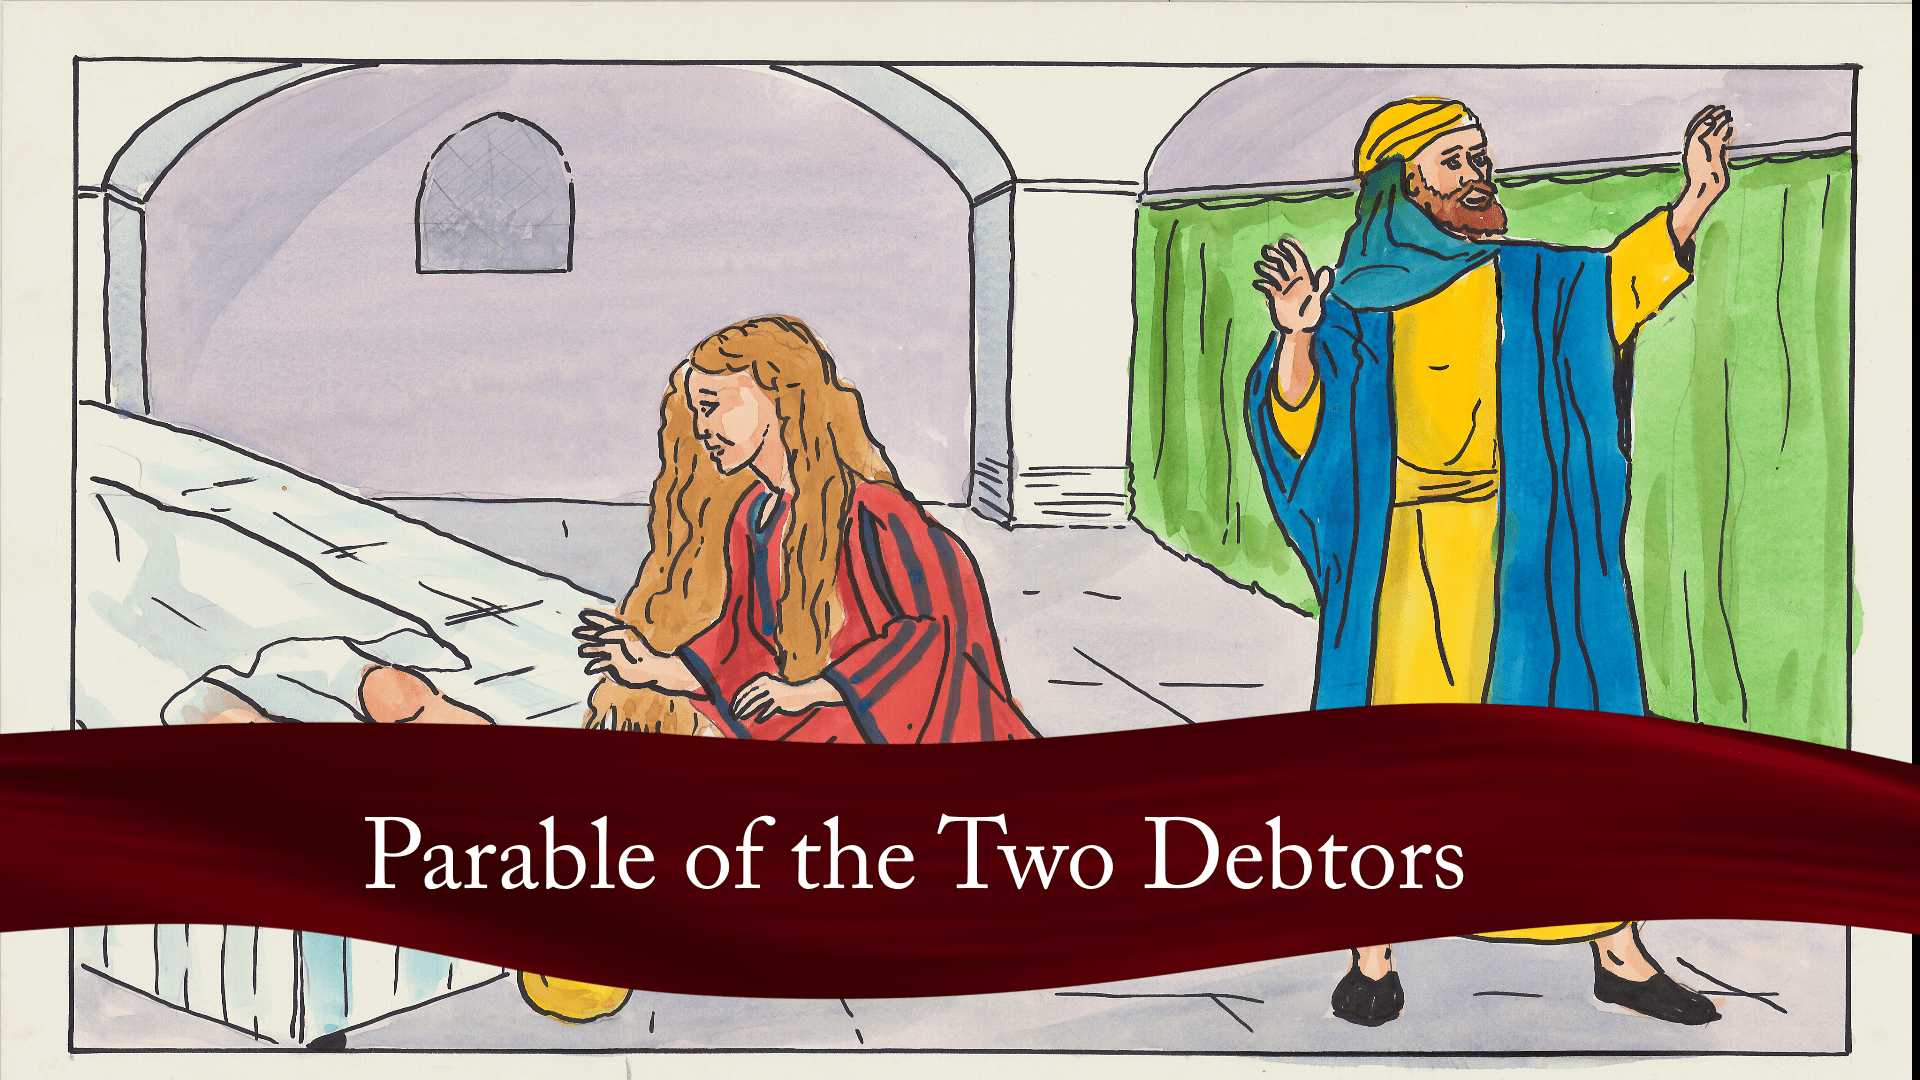 Parable of the Two Debtors